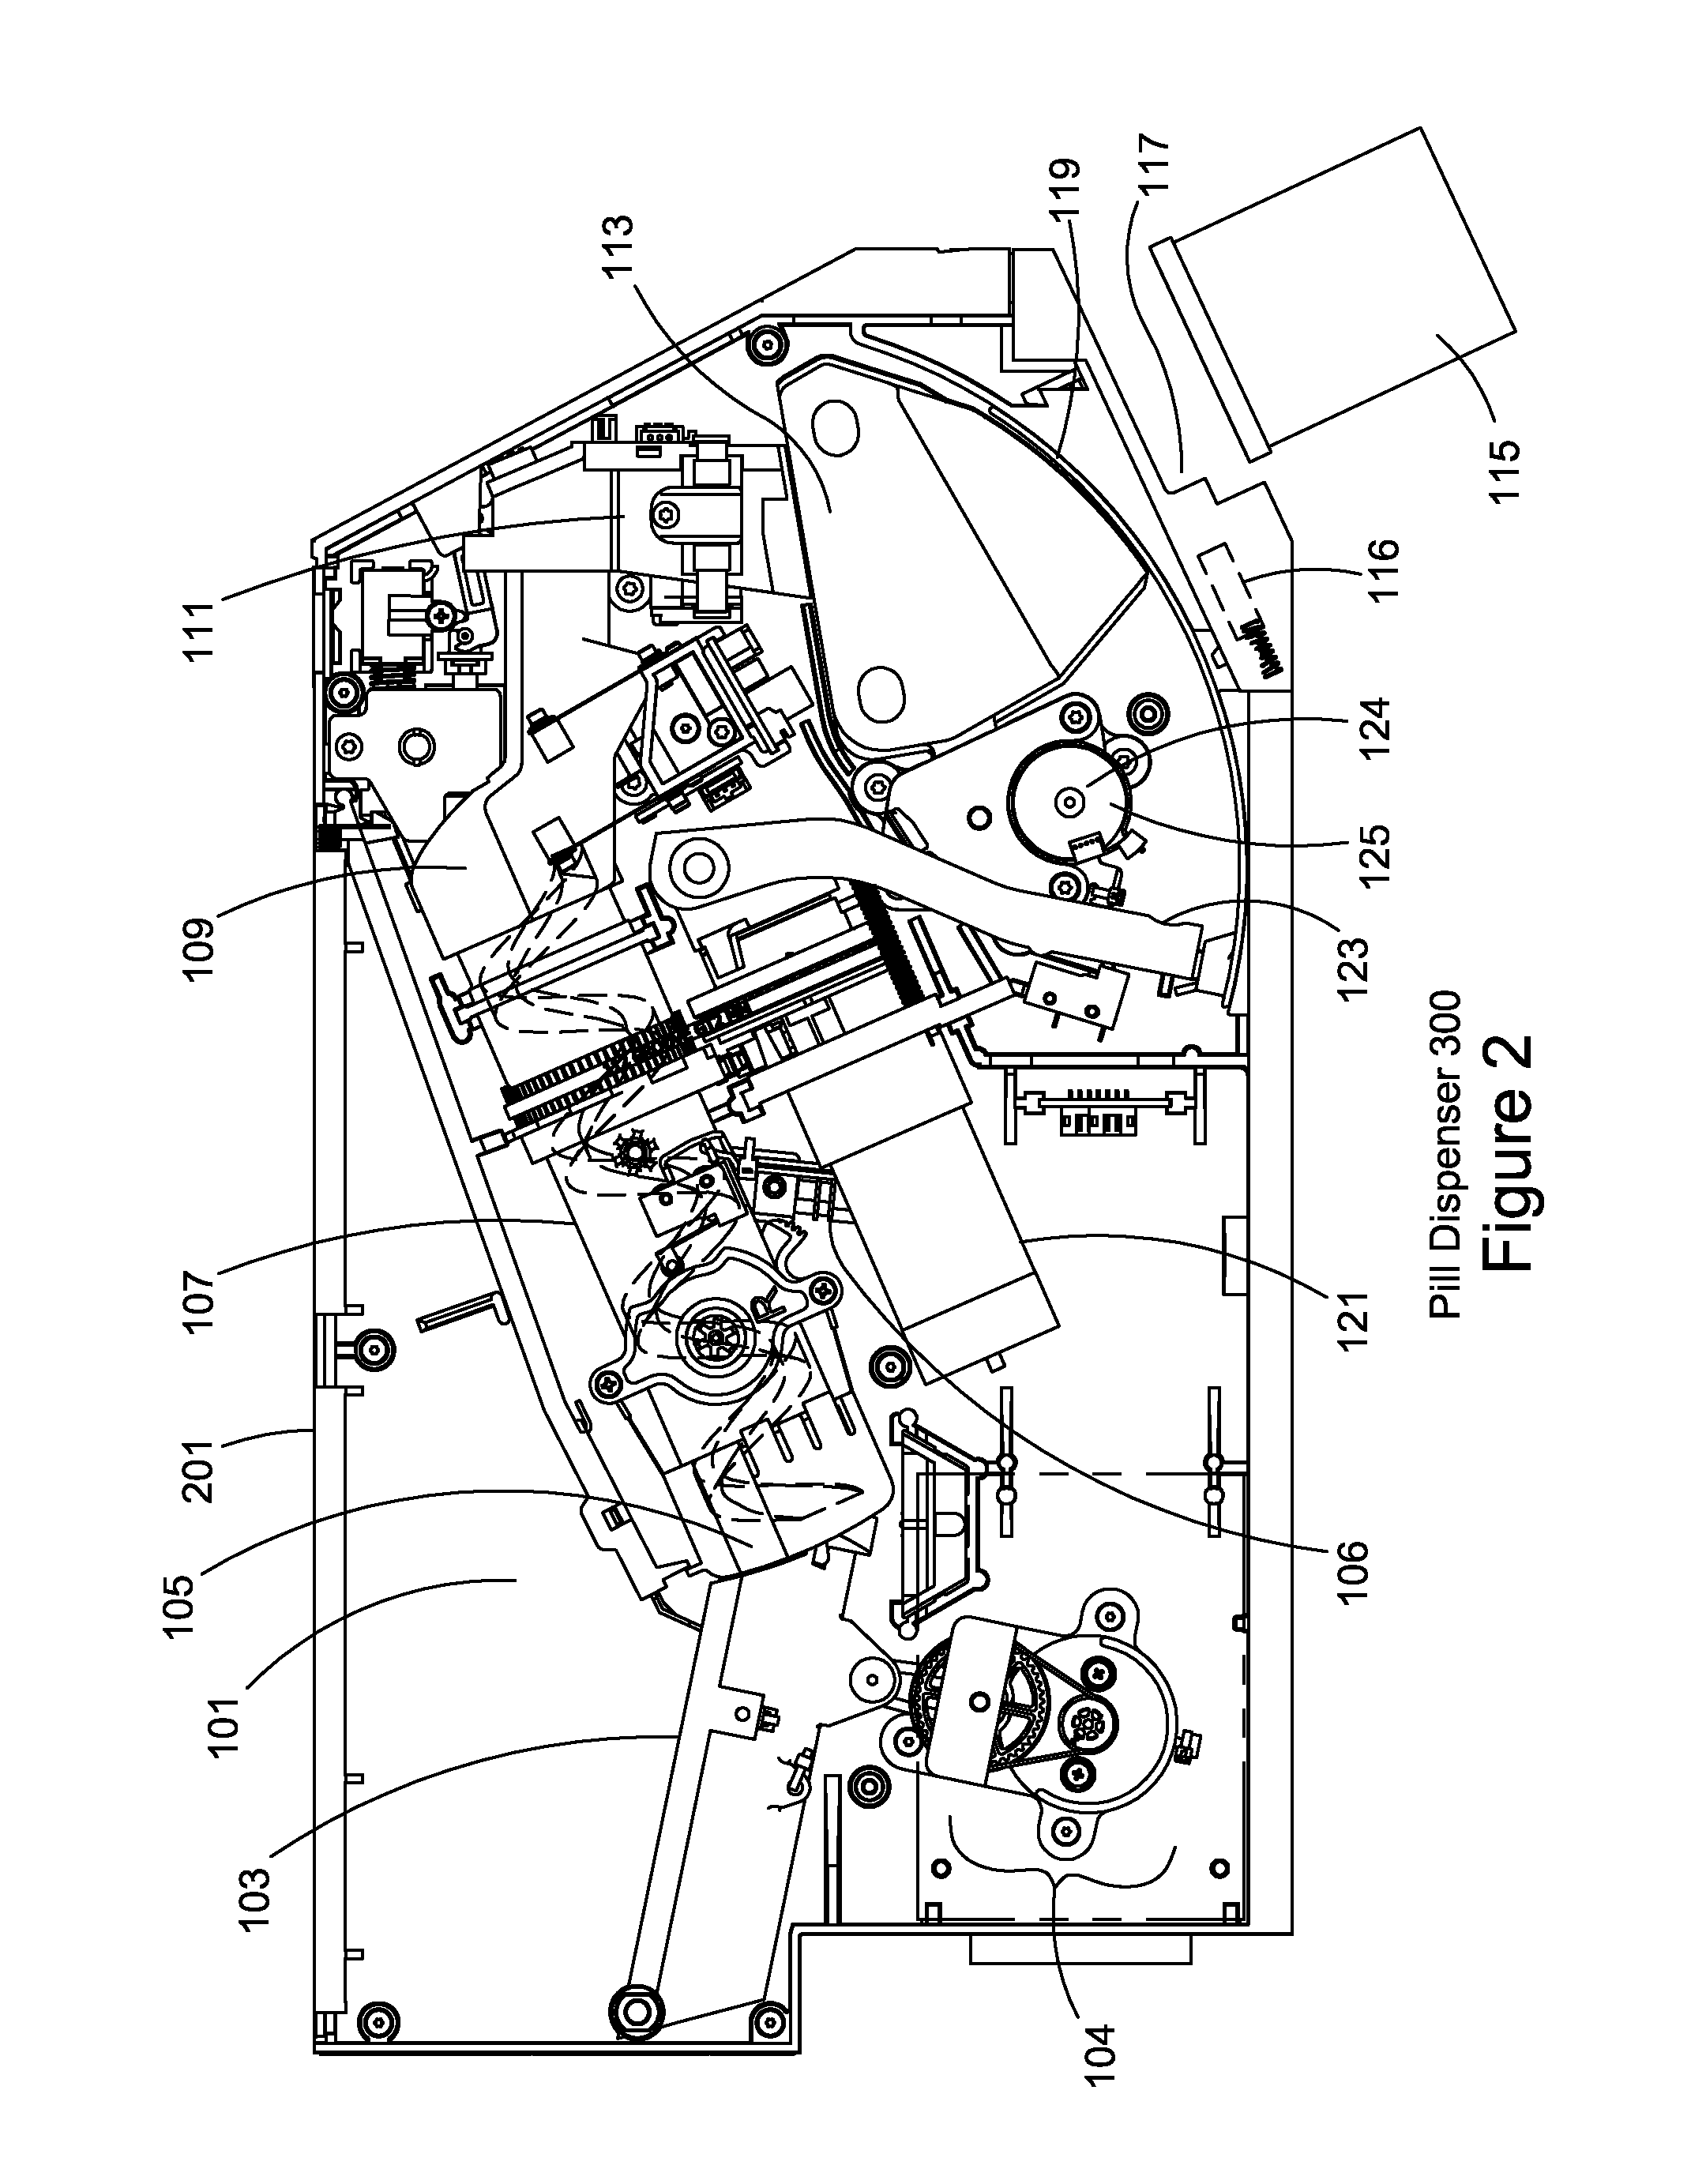 Apparatus for counting and dispensing pills with a vibrating plate